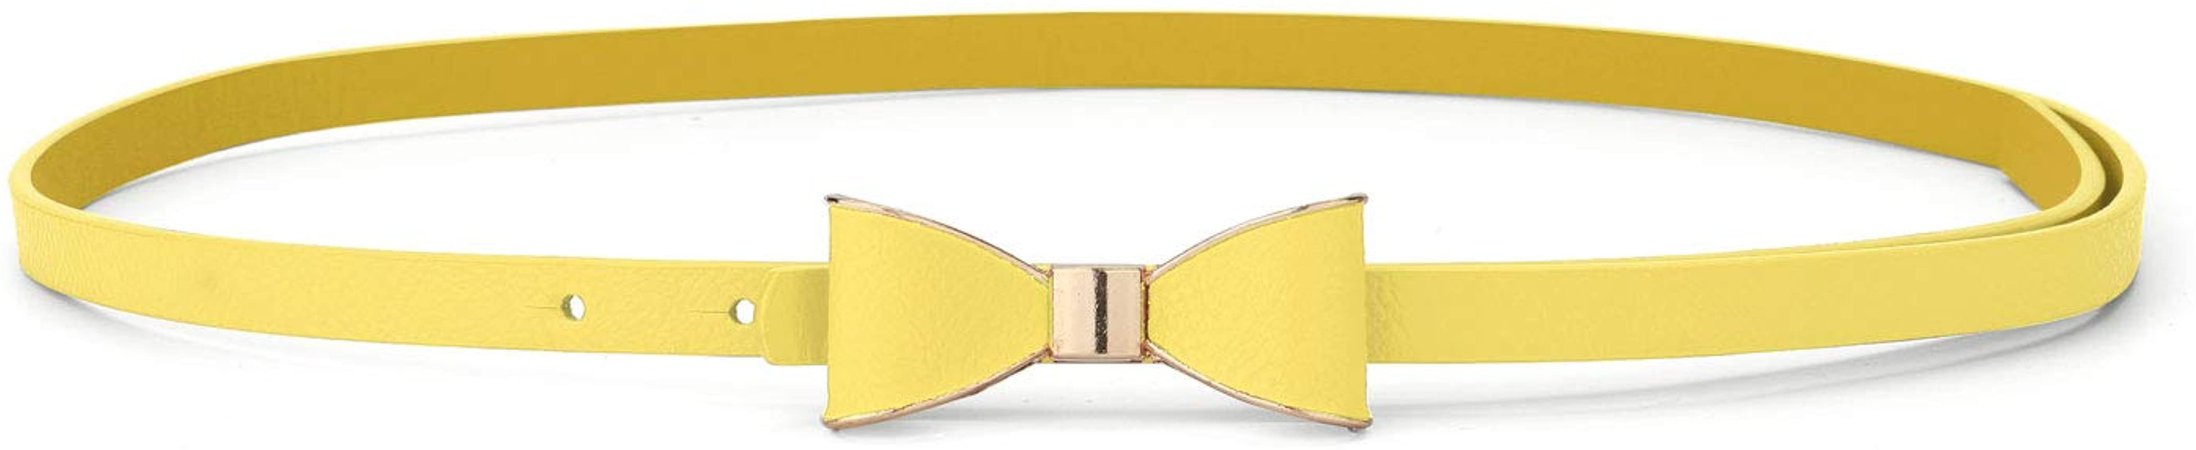 uxcell Skinny Waist Belt Metal Bow-knot No Buckle Thin Belt for Women Yellow at Amazon Women’s Clothing store